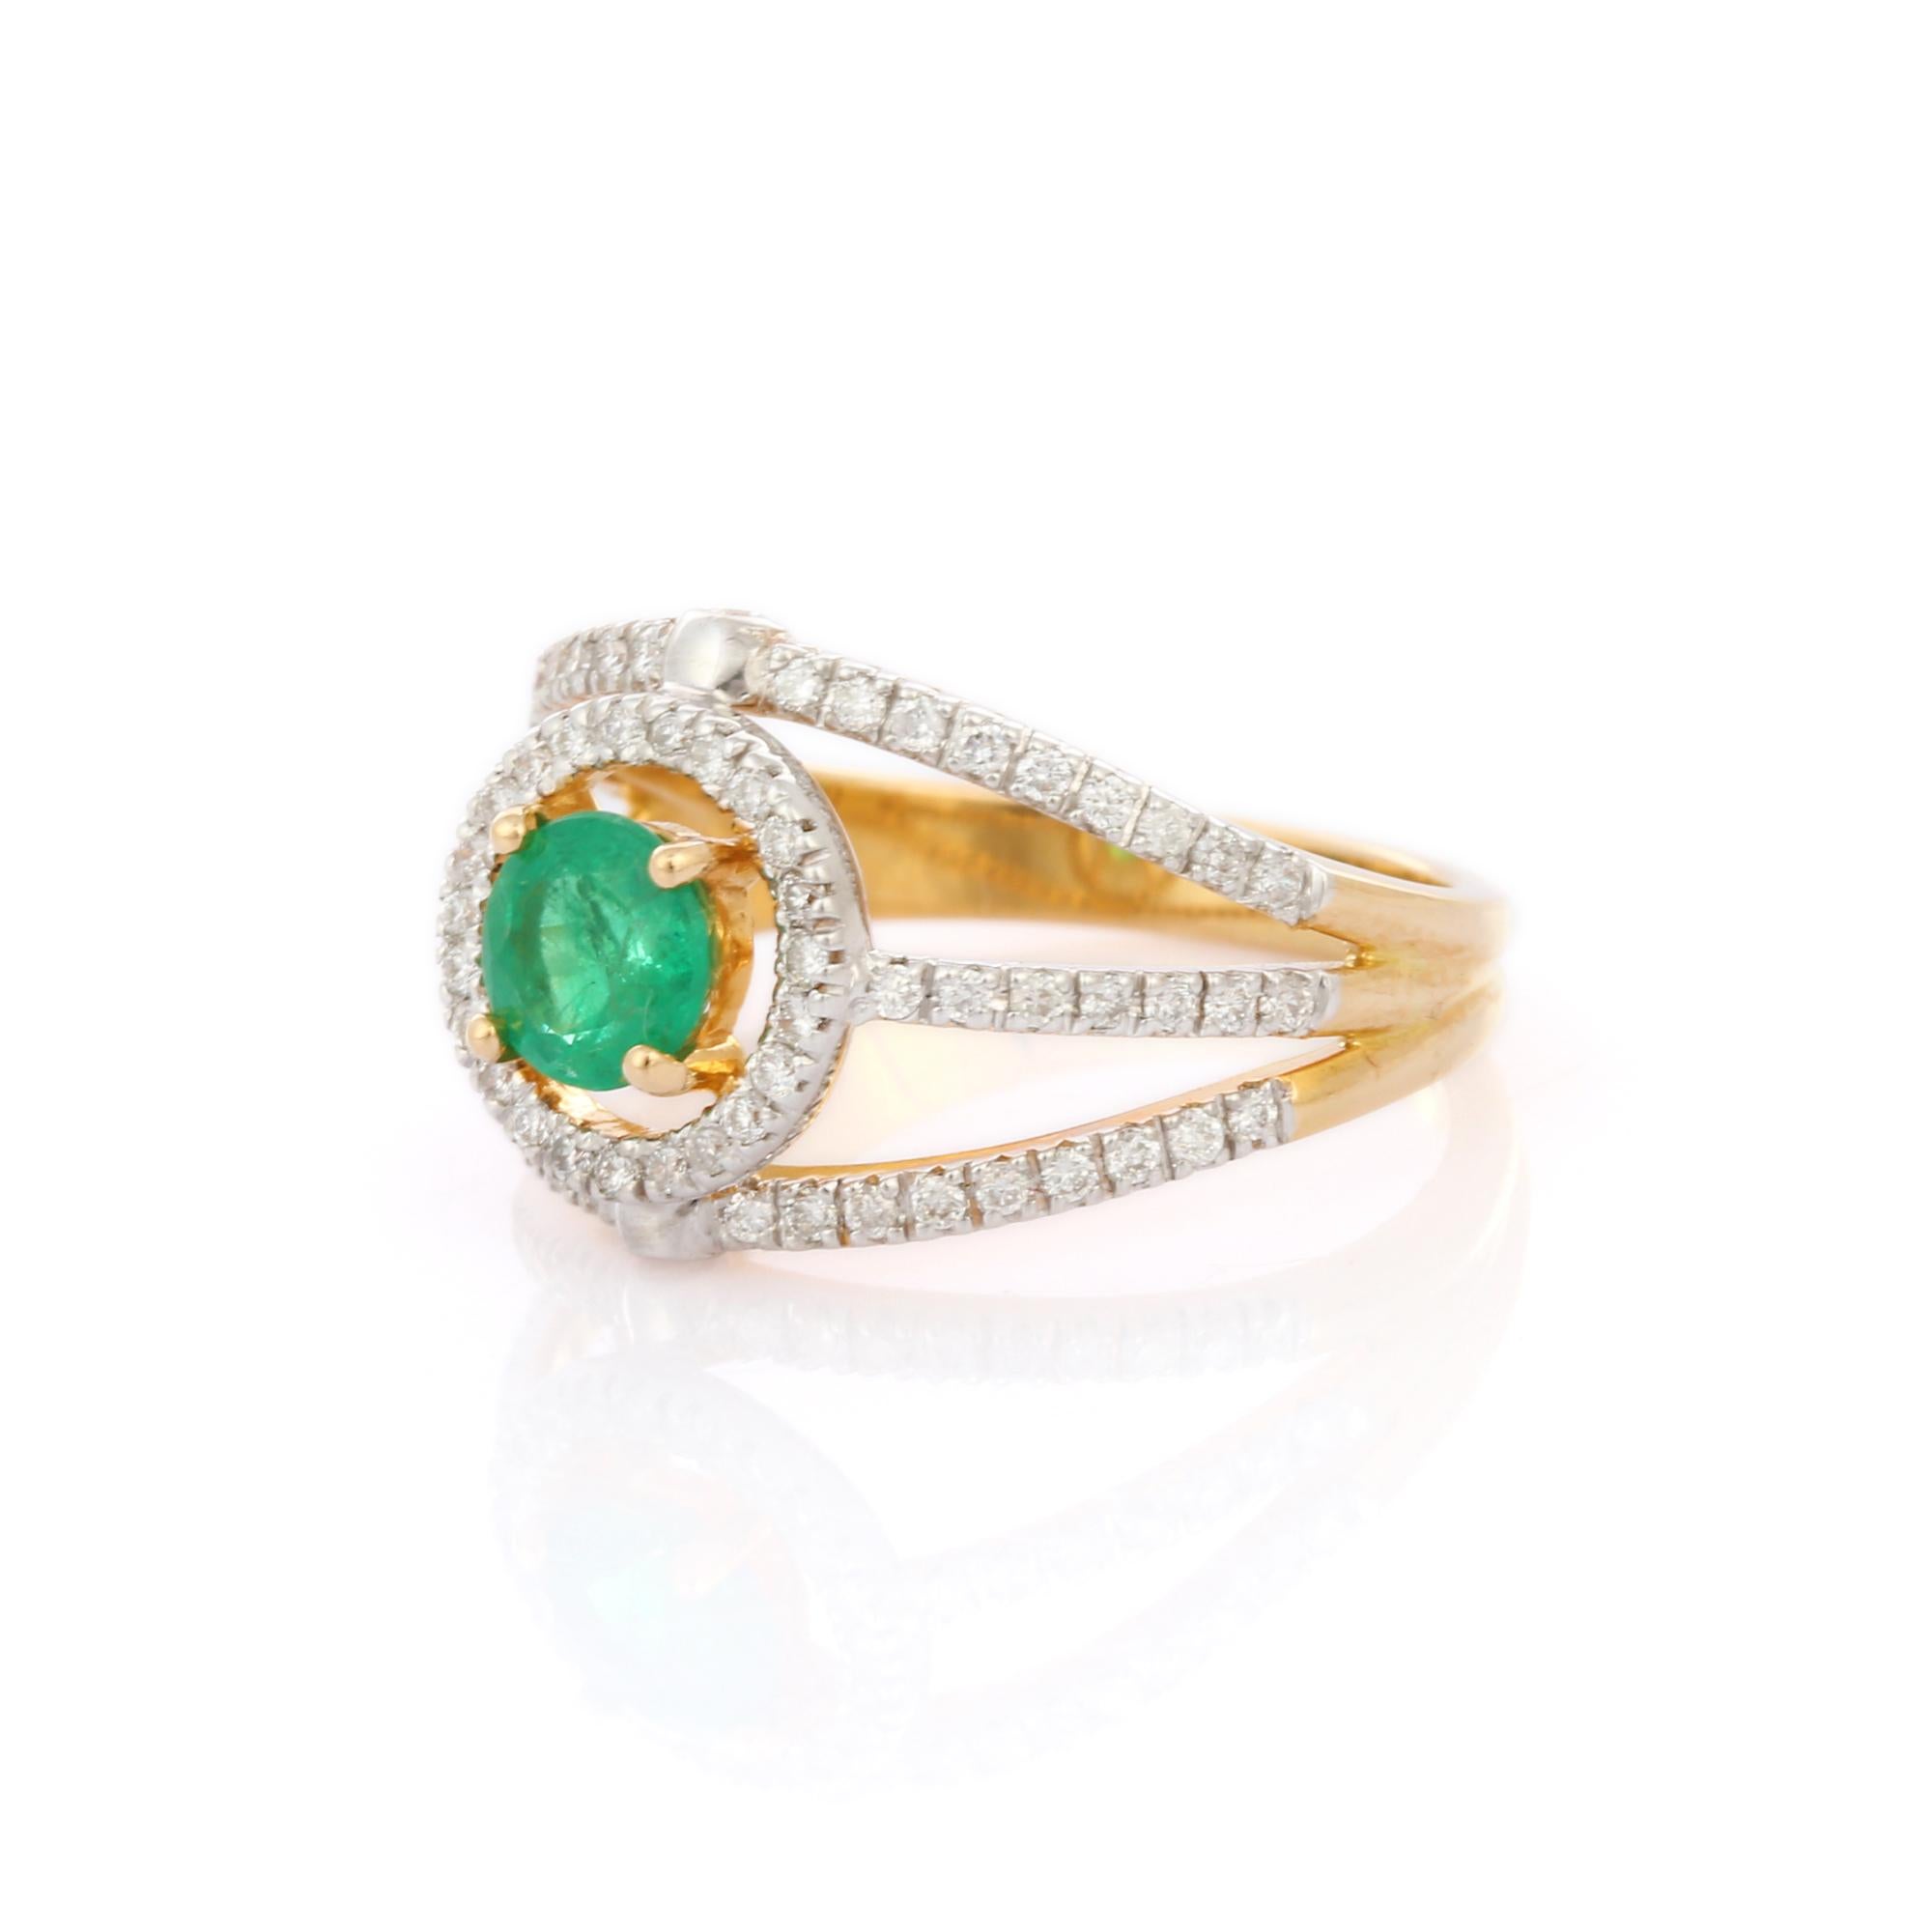 For Sale:  18K Yellow Gold Brilliant Cut Round Emerald and Diamond Studded Wedding Ring 3